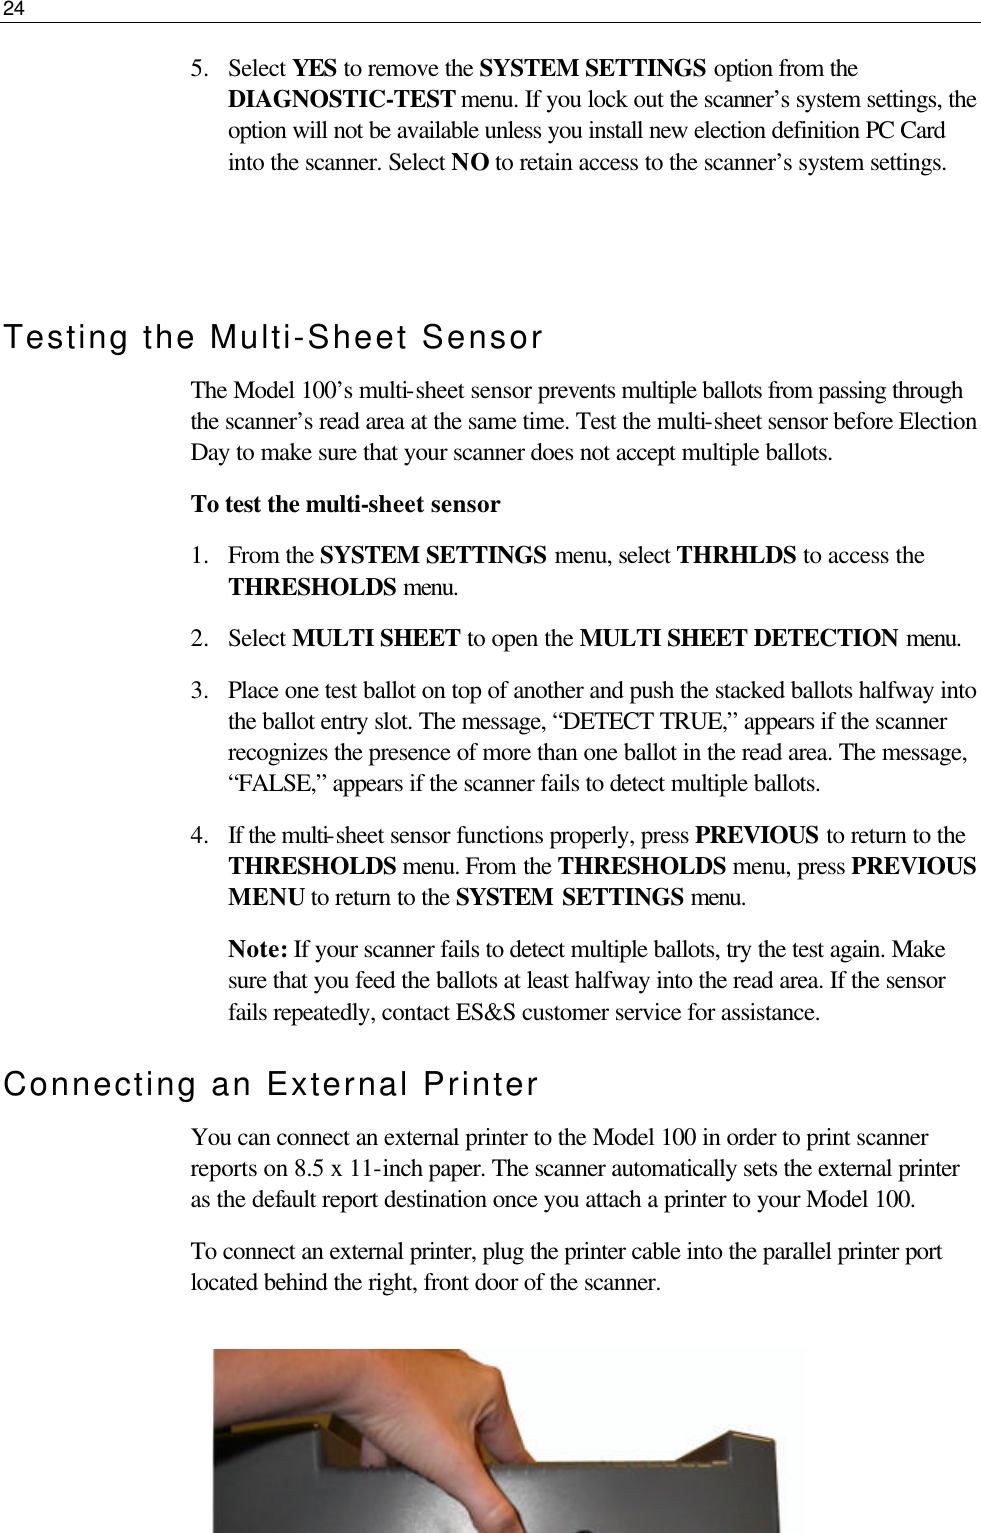 24  5.  Select YES to remove the SYSTEM SETTINGS option from the DIAGNOSTIC-TEST menu. If you lock out the scanner’s system settings, the option will not be available unless you install new election definition PC Card into the scanner. Select NO to retain access to the scanner’s system settings.   Testing the Multi-Sheet Sensor The Model 100’s multi-sheet sensor prevents multiple ballots from passing through the scanner’s read area at the same time. Test the multi-sheet sensor before Election Day to make sure that your scanner does not accept multiple ballots. To test the multi-sheet sensor 1.  From the SYSTEM SETTINGS menu, select THRHLDS to access the THRESHOLDS menu. 2.  Select MULTI SHEET to open the MULTI SHEET DETECTION menu. 3.  Place one test ballot on top of another and push the stacked ballots halfway into the ballot entry slot. The message, “DETECT TRUE,” appears if the scanner recognizes the presence of more than one ballot in the read area. The message, “FALSE,” appears if the scanner fails to detect multiple ballots. 4.  If the multi-sheet sensor functions properly, press PREVIOUS to return to the THRESHOLDS menu. From the THRESHOLDS menu, press PREVIOUS MENU to return to the SYSTEM SETTINGS menu.  Note: If your scanner fails to detect multiple ballots, try the test again. Make sure that you feed the ballots at least halfway into the read area. If the sensor fails repeatedly, contact ES&amp;S customer service for assistance. Connecting an External Printer You can connect an external printer to the Model 100 in order to print scanner reports on 8.5 x 11-inch paper. The scanner automatically sets the external printer as the default report destination once you attach a printer to your Model 100. To connect an external printer, plug the printer cable into the parallel printer port located behind the right, front door of the scanner.   